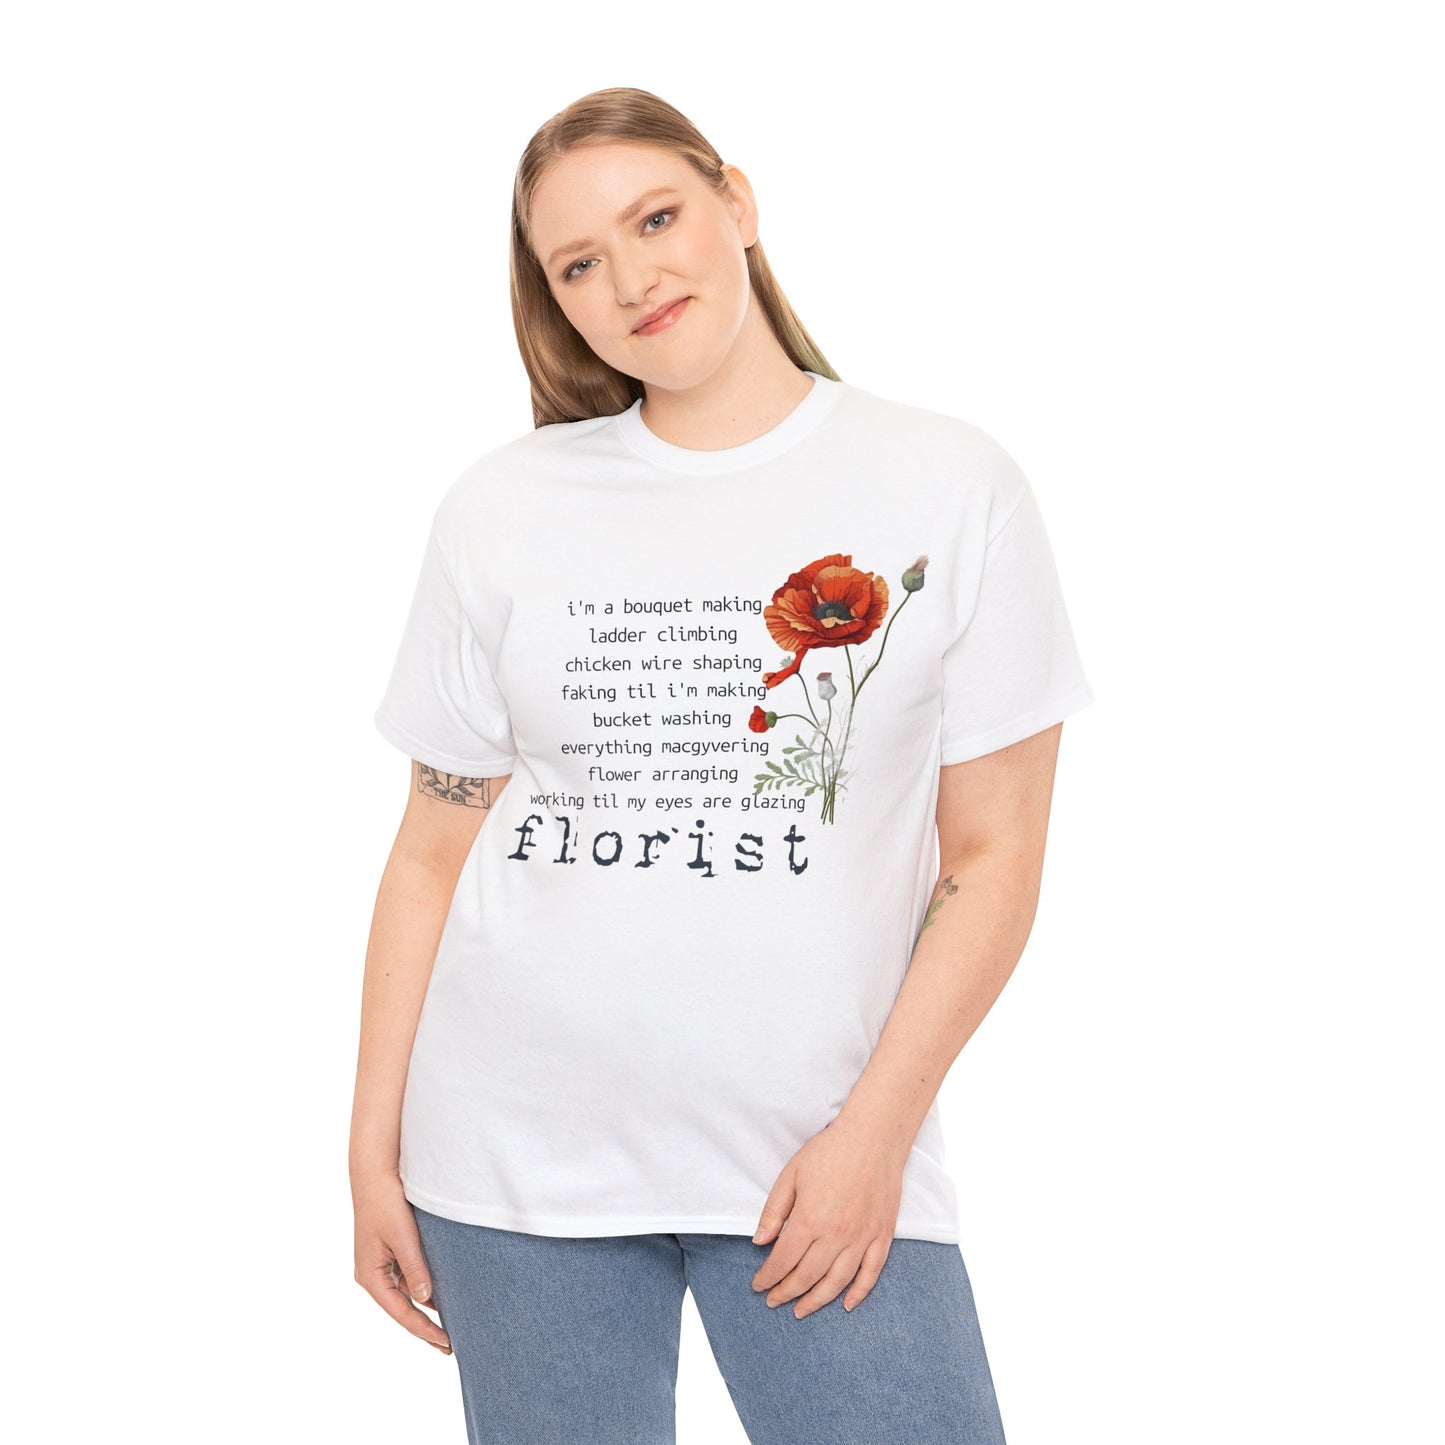 i'm a bucket washing everything macgyvering.. florist graphic tee - EXPRESS DELIVERY